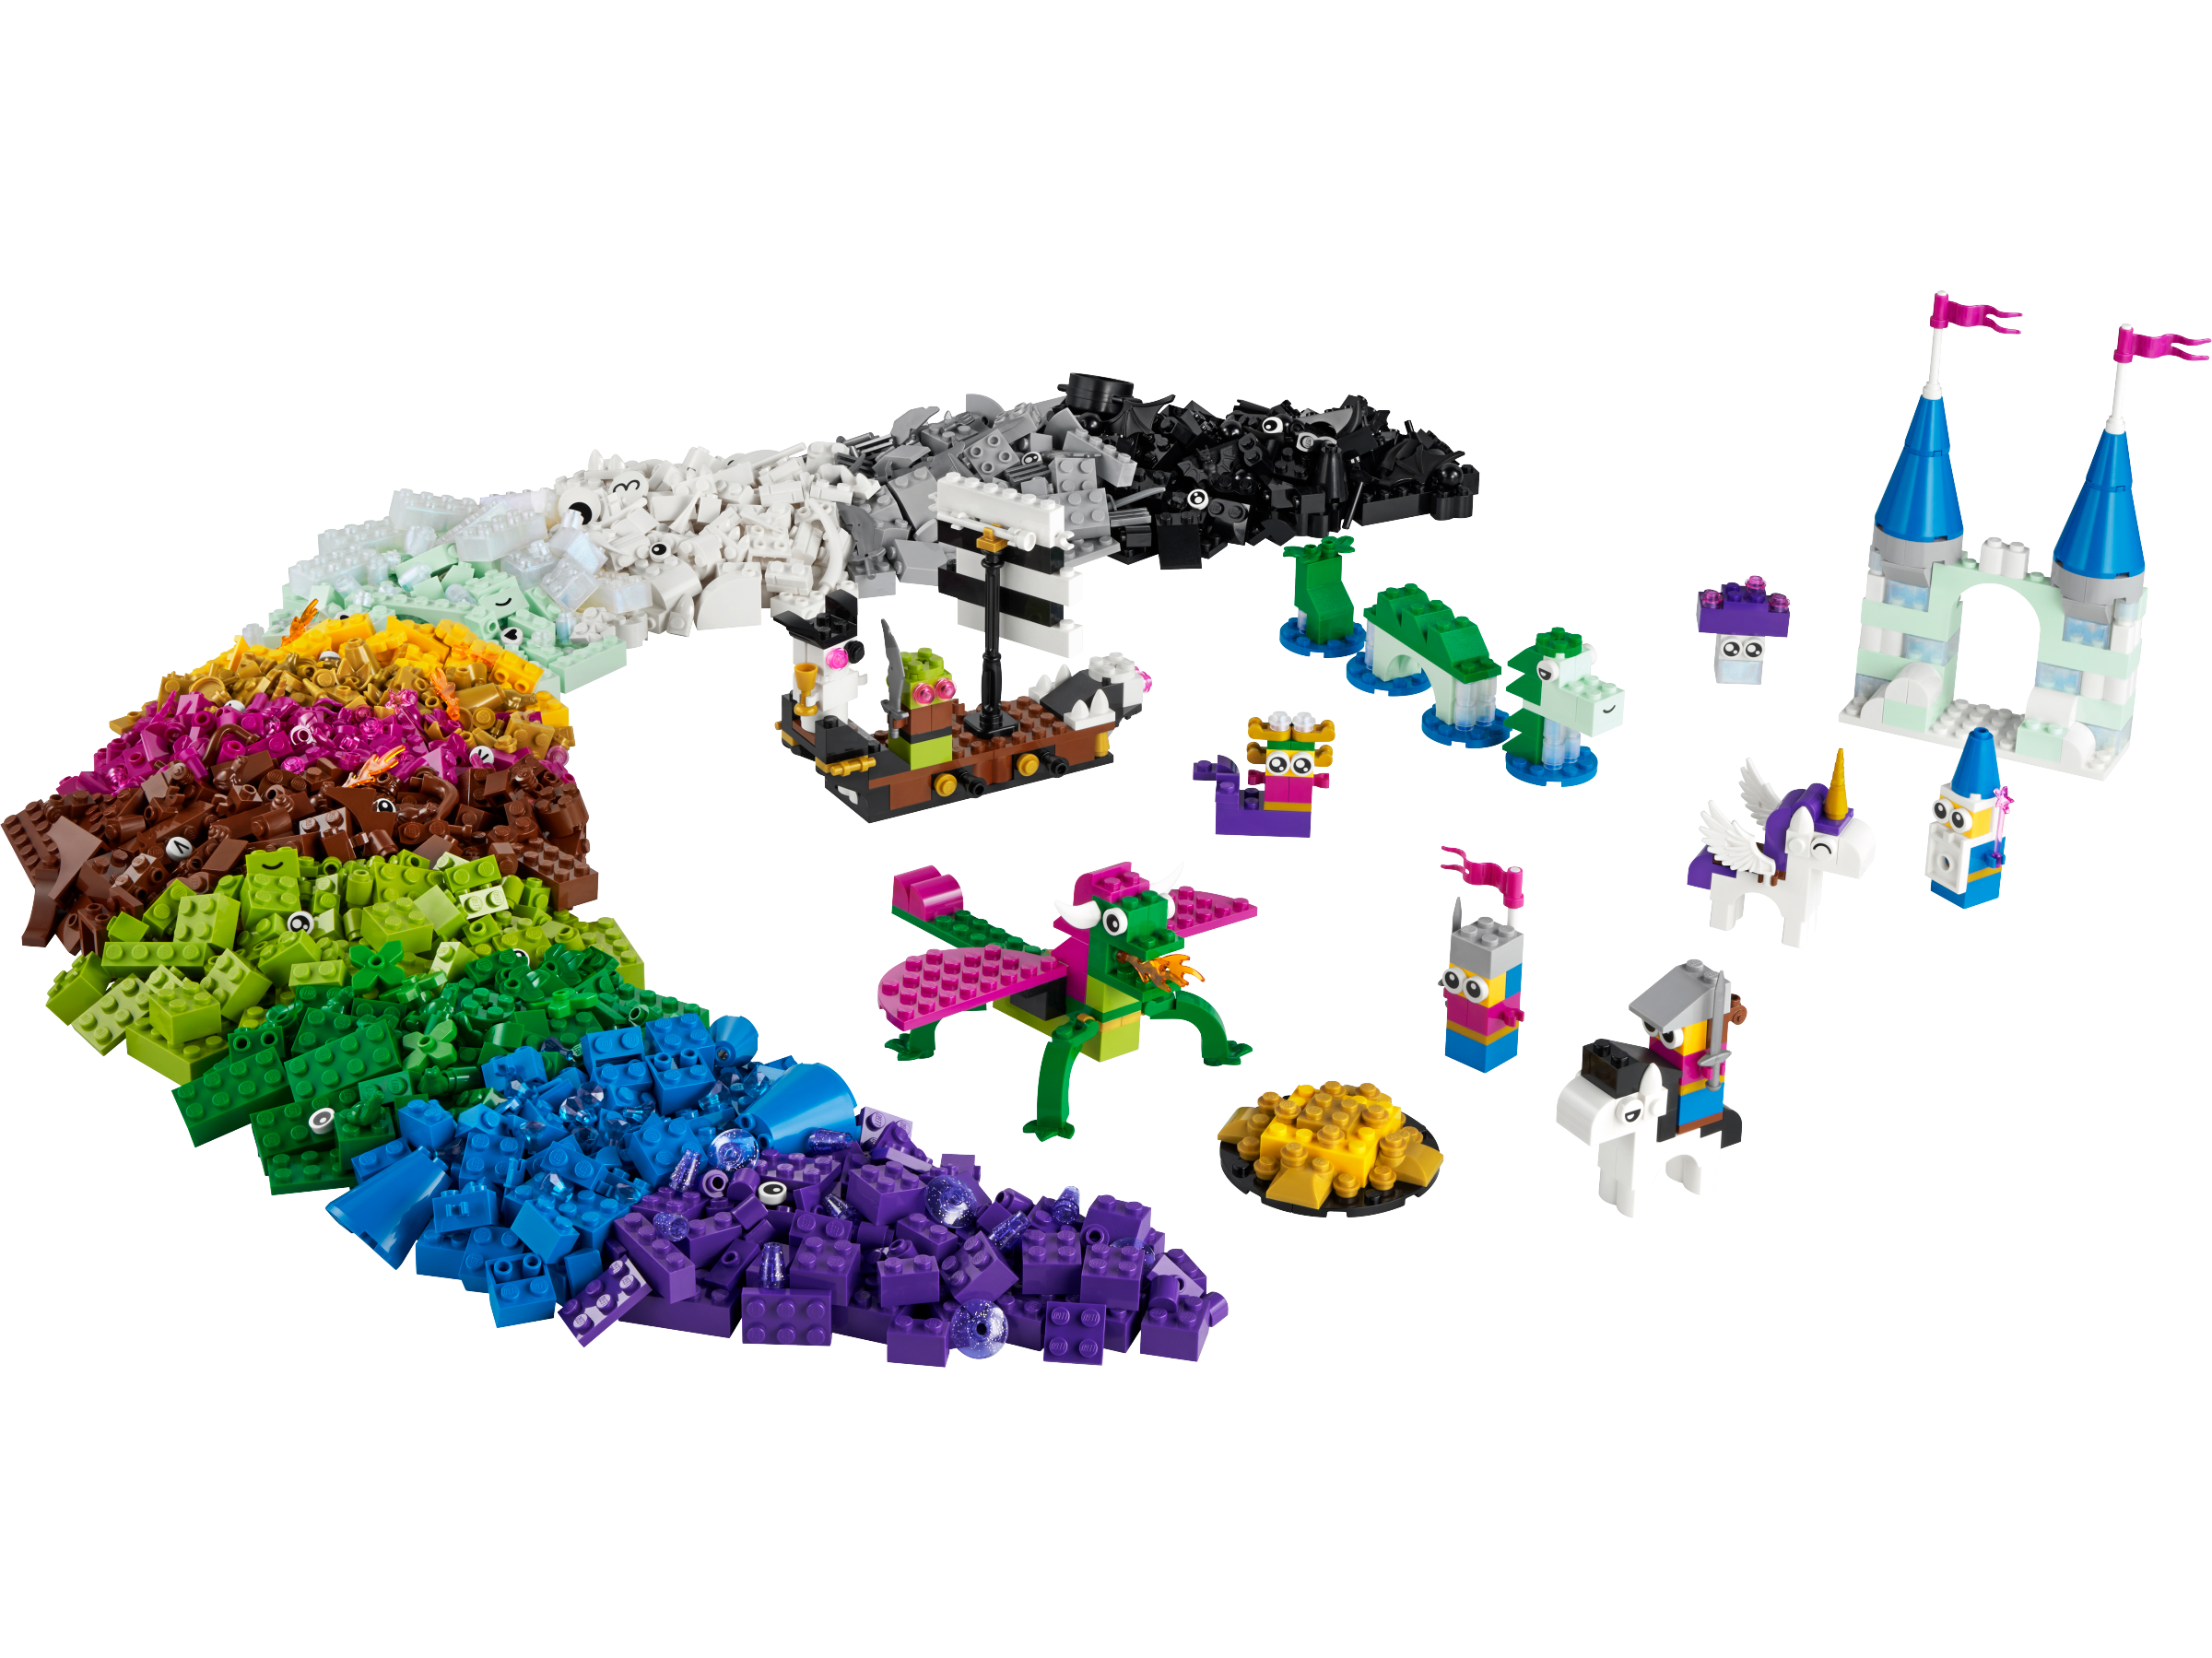 Creative Fantasy Universe 11033 | Classic | online at Official LEGO® US